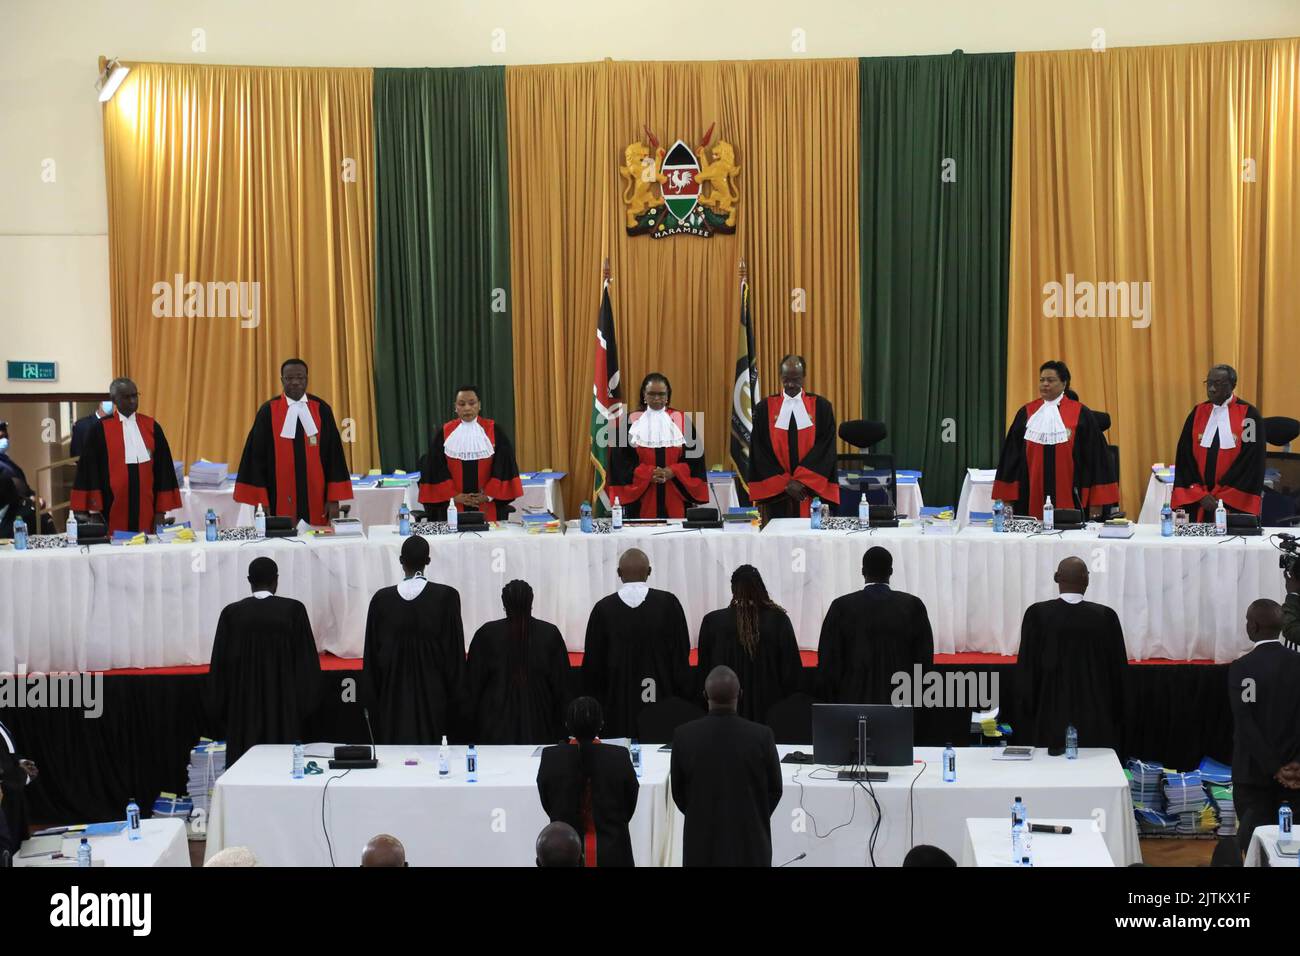 Chief justice of the supreme court Martha Koome (C) presides over a bench of seven judges which consists of (L-R) Supreme court judges, Isaac Lenaola, Smokin Wanjala, Philomena Mwilu, Mohamed Ibrahim, Njoki Ndungu, and William Ouko during day one of the presidential election petition at the Supreme Court. Azimio la Umoja One Kenya coalition presidential candidate Raila Odinga on August 22, 2022 filed a petition at the Supreme Court Sub-Registry offices seeking to challenge the victory of president elect William Ruto which he termed as 'null and void'. (Photo by John Ochieng/SOPA Images/Sipa Stock Photo